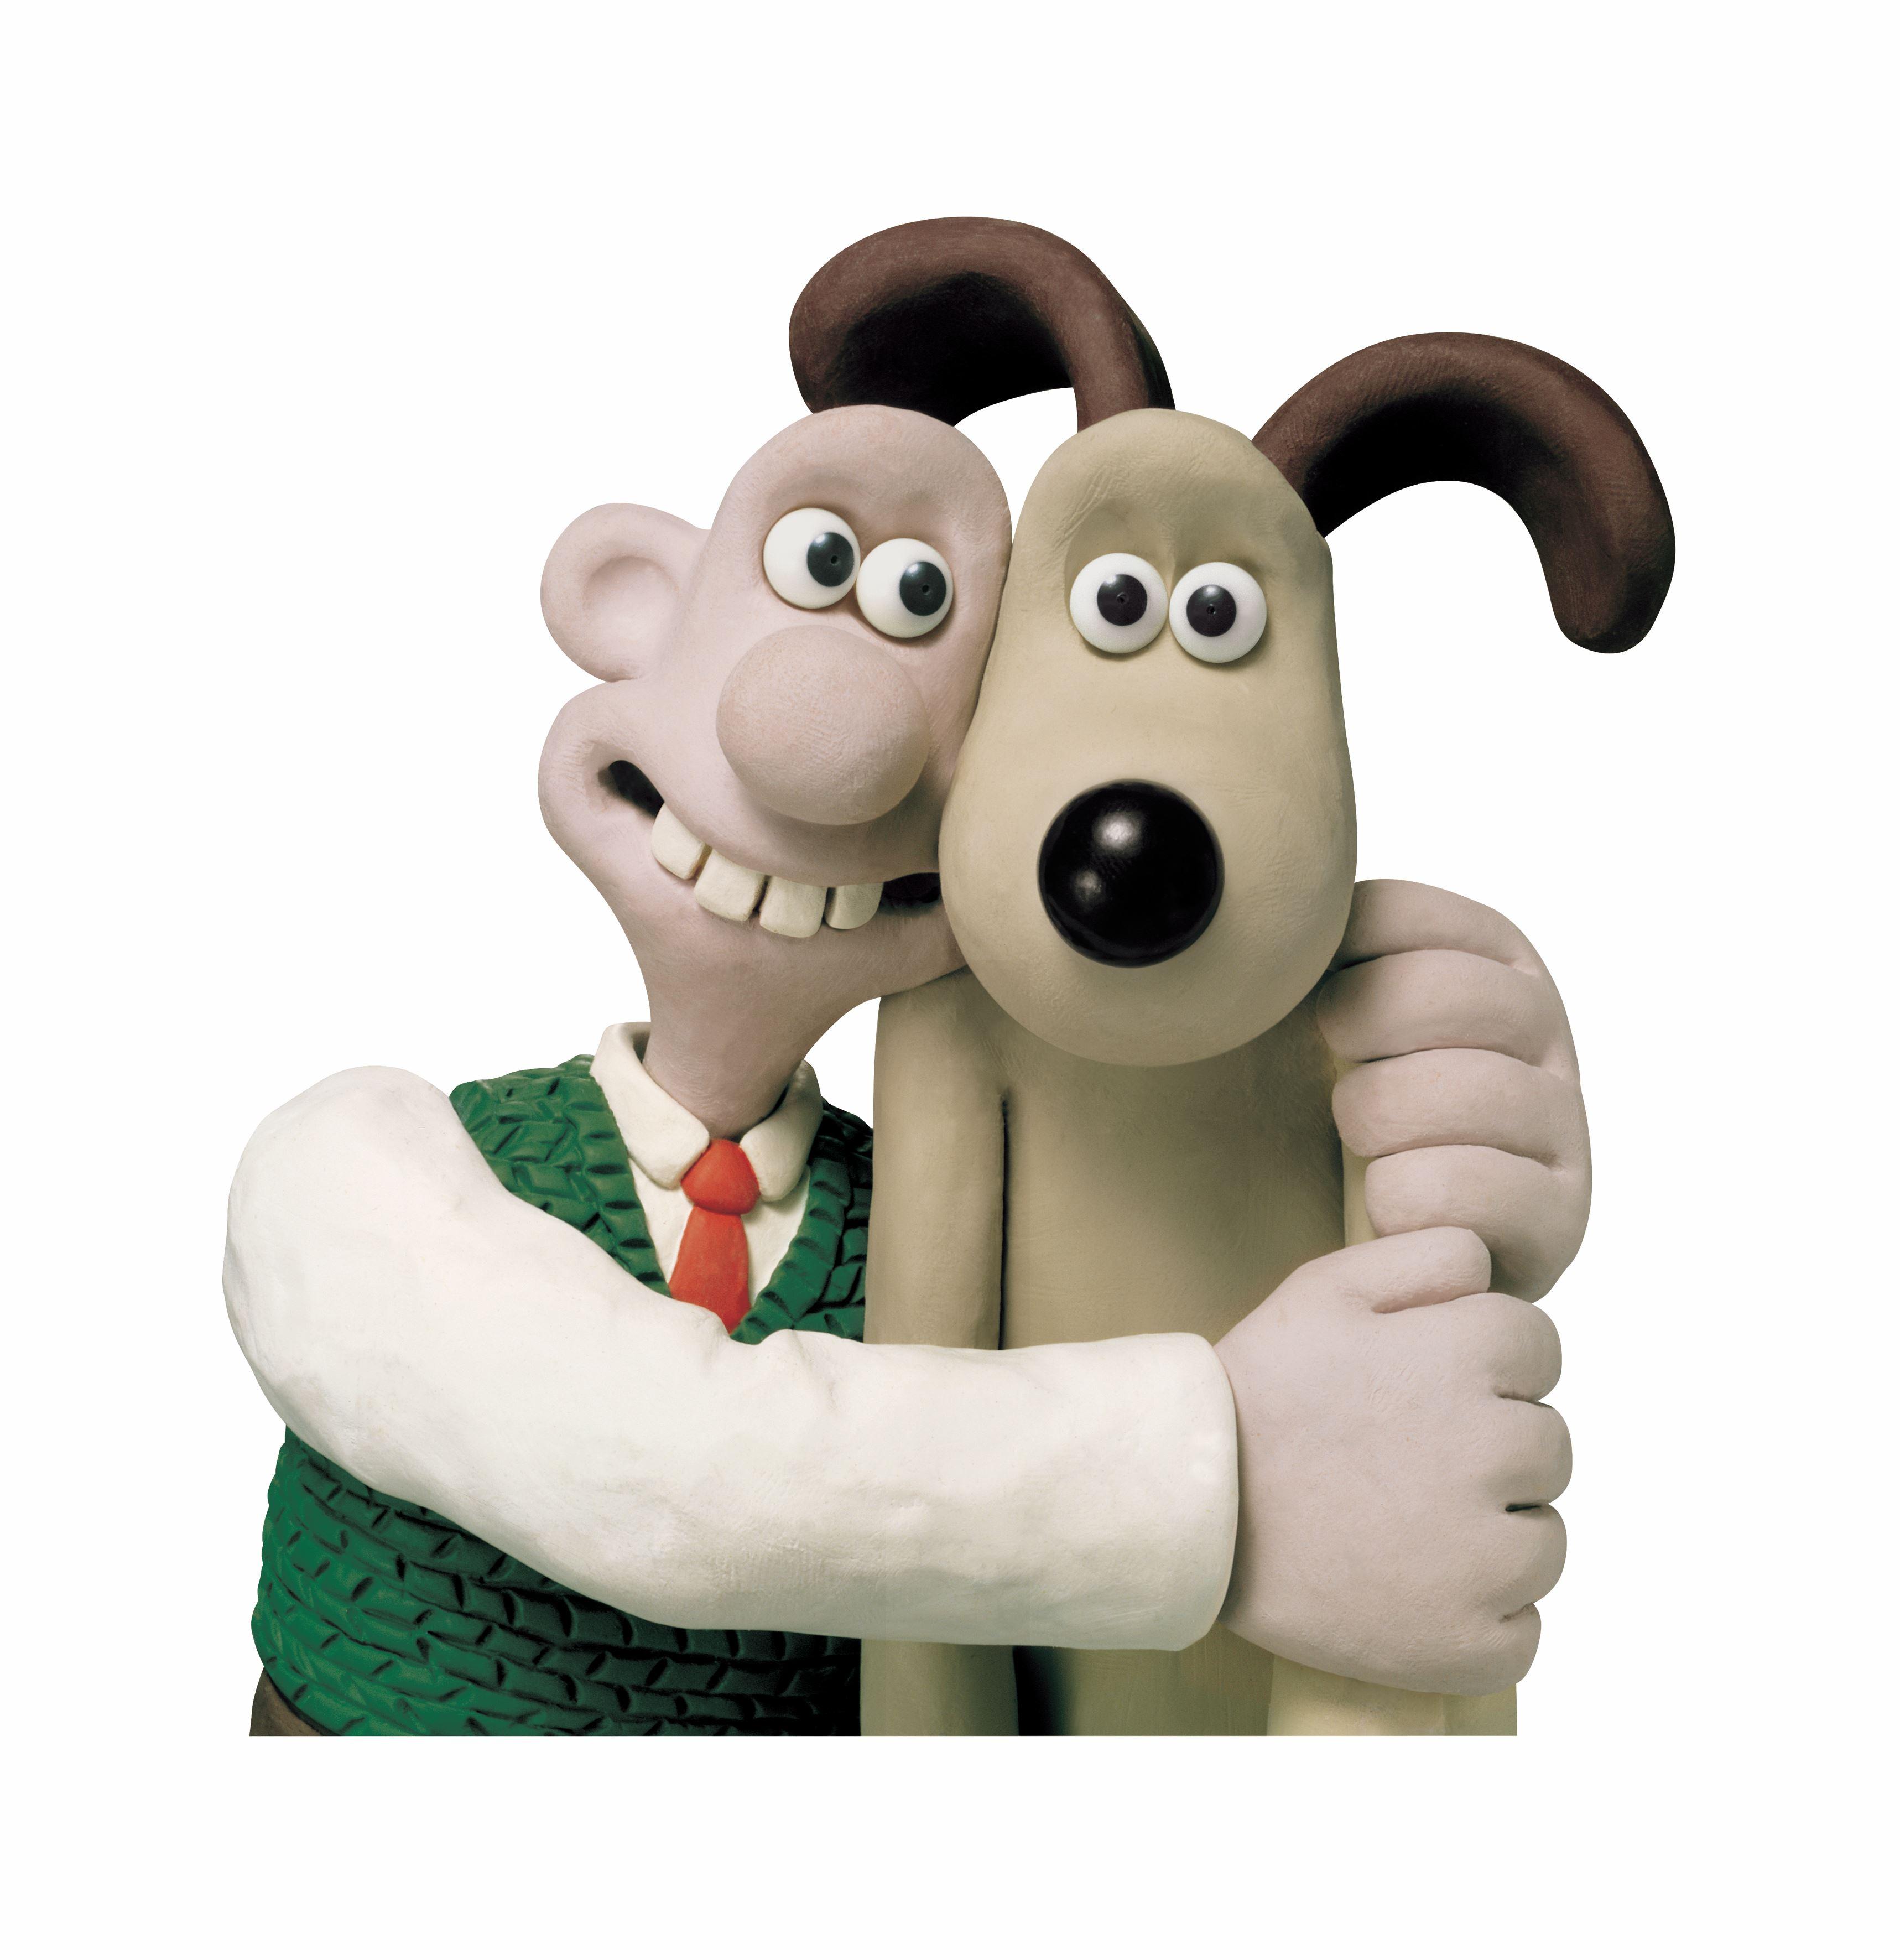 Wallace and Gromit Theme Song. Movie Theme Songs & TV Soundtracks